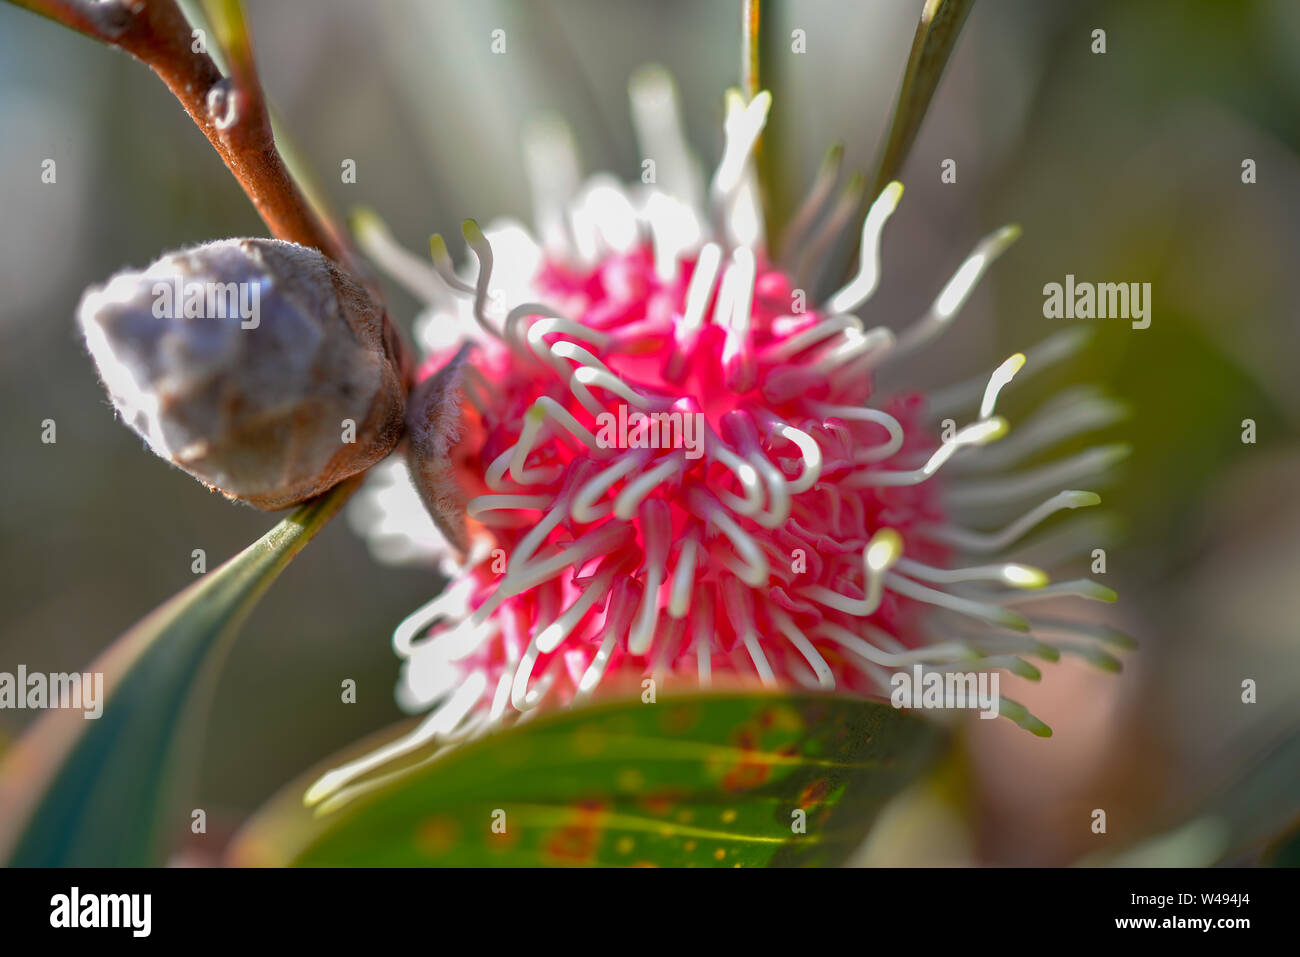 Flowering Gum red and white flower attracting bees Stock Photo